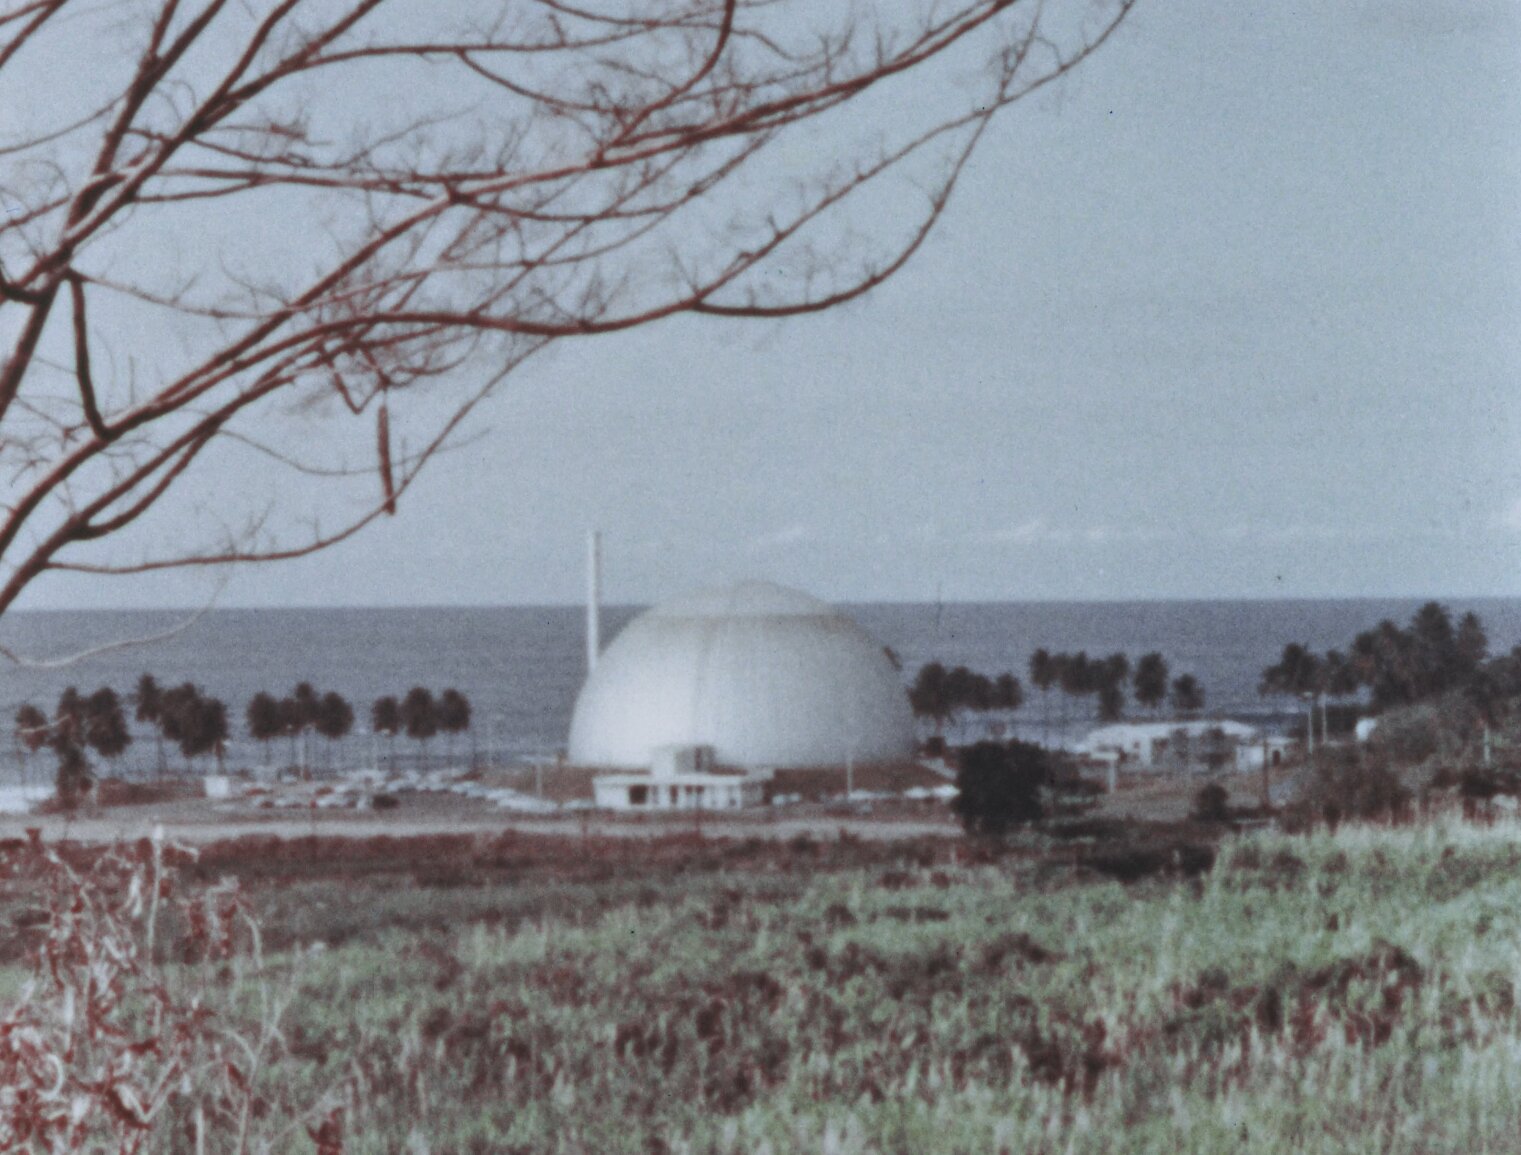 Another exterior view of the Bonus nuclear reactor site, with dome, grasses, a tree, the ocean, and palm trees shown